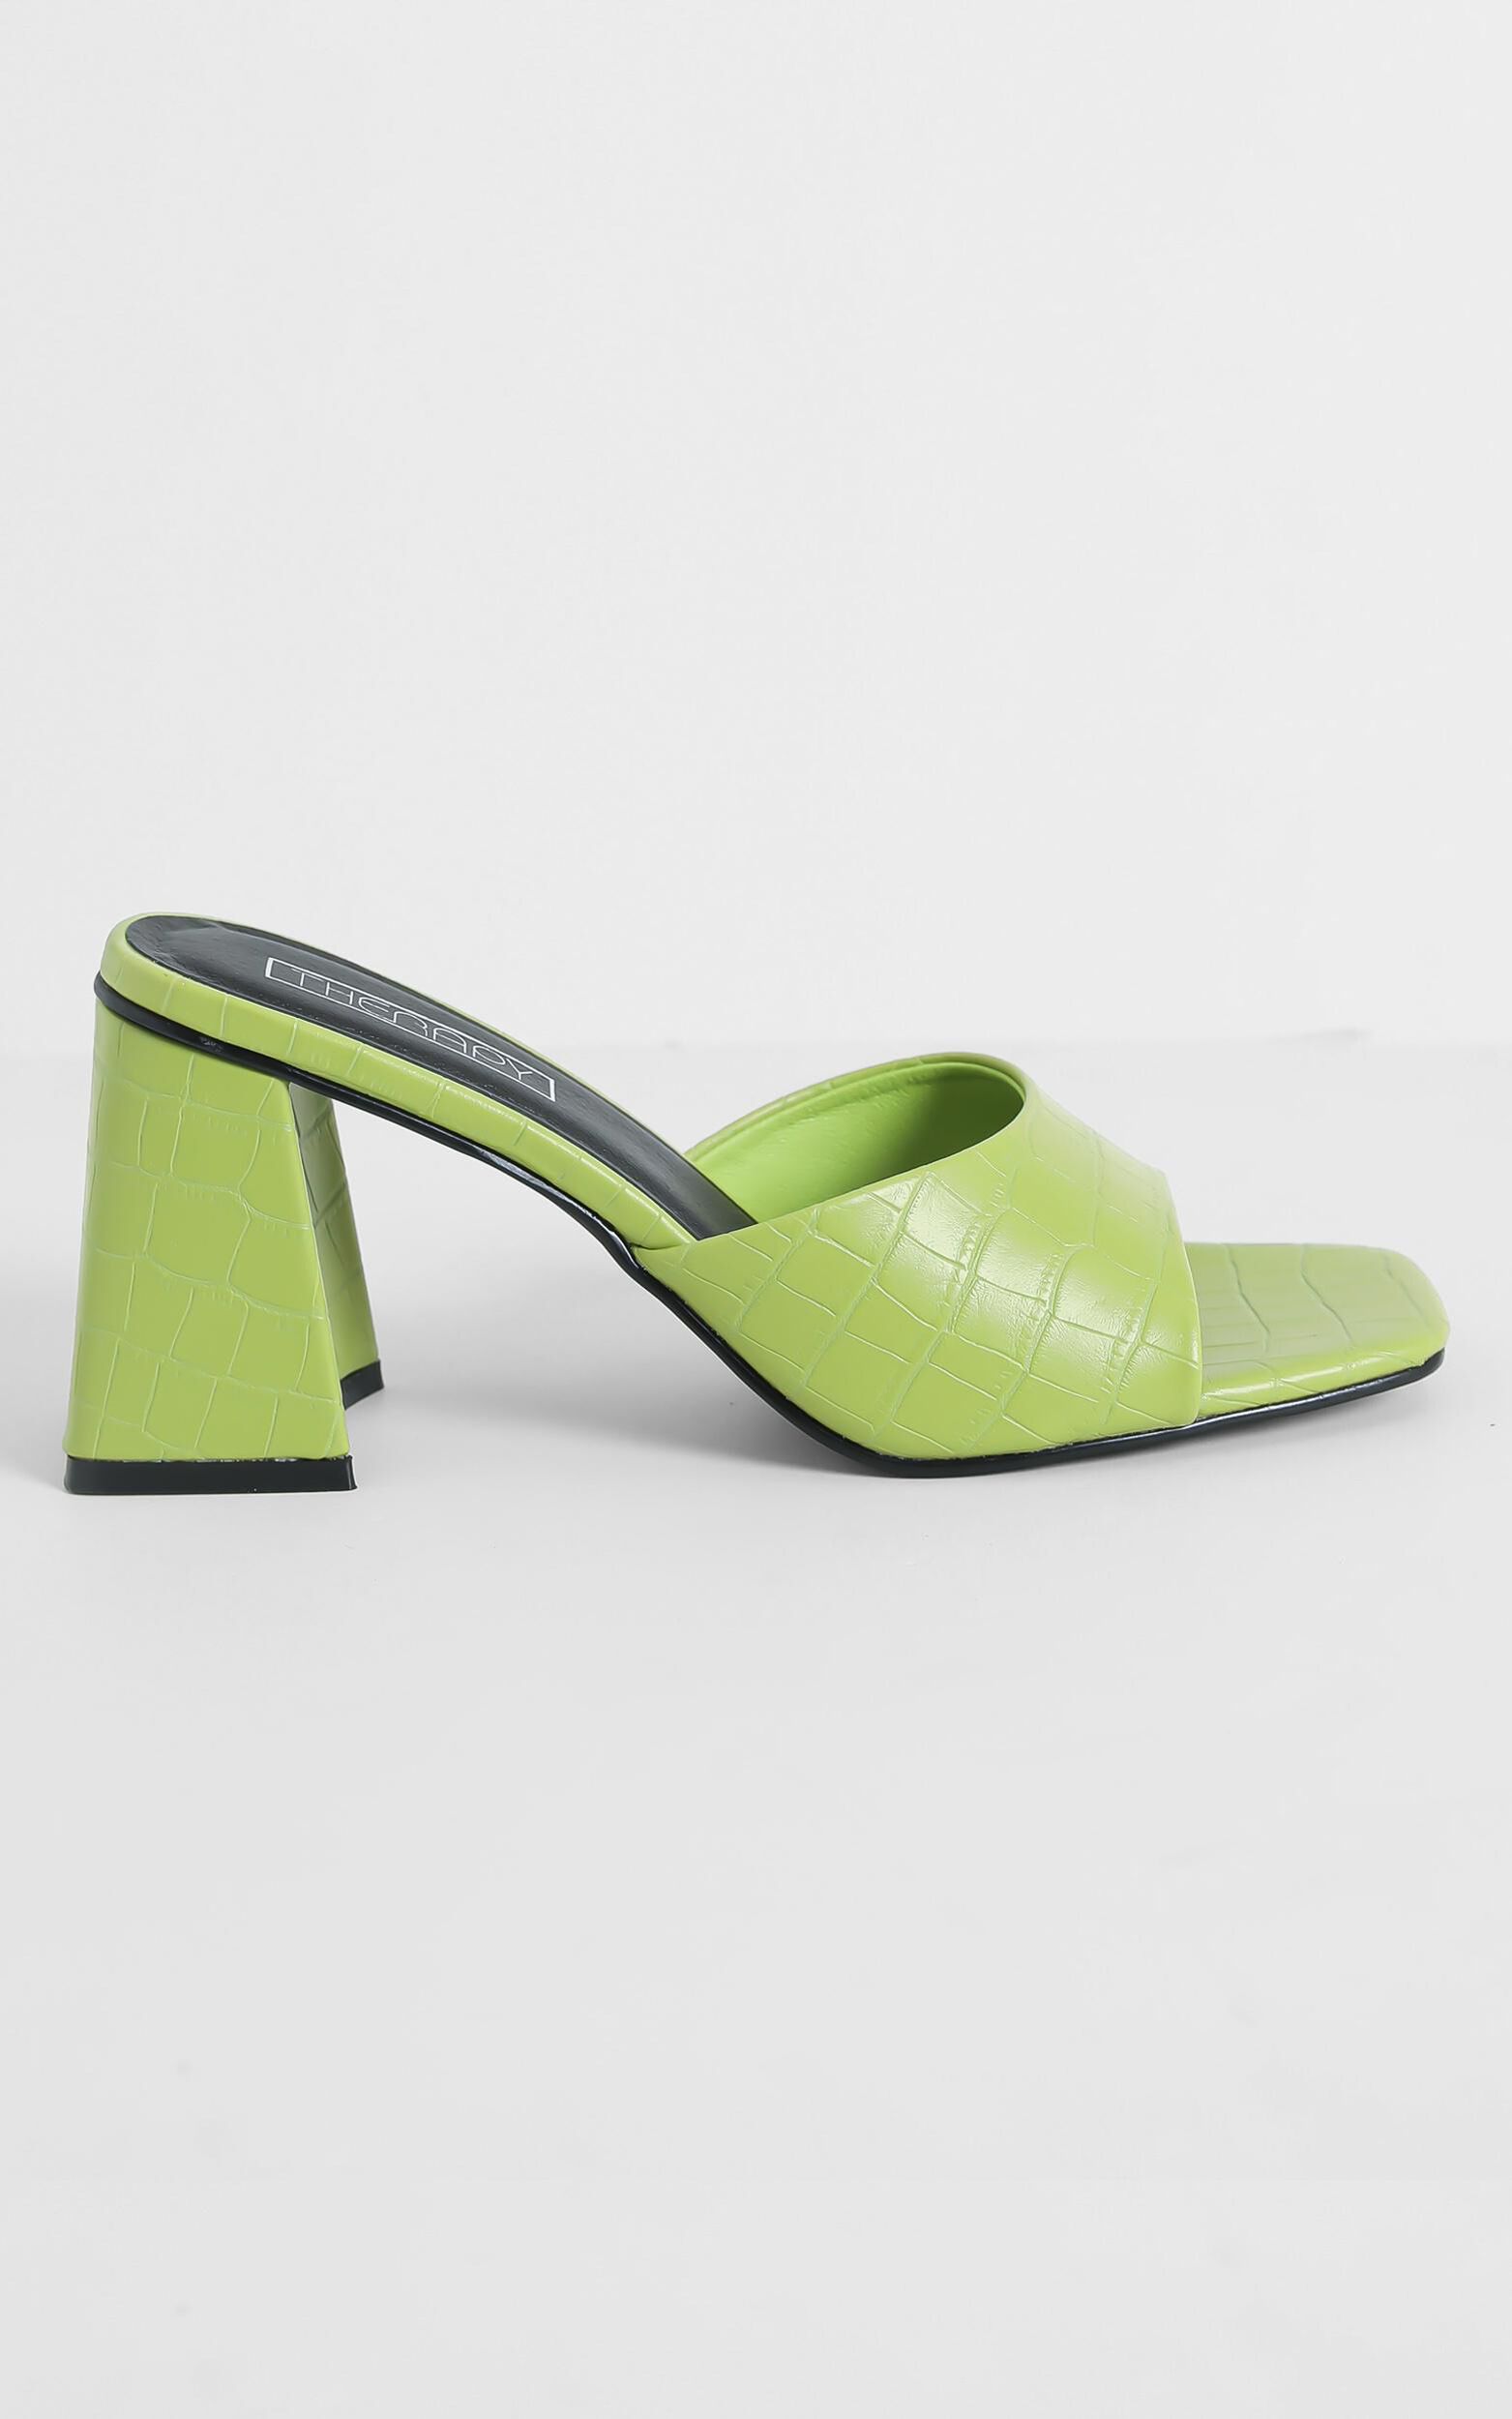 Therapy - Colina Heels in Lime Green - 05, GRN3